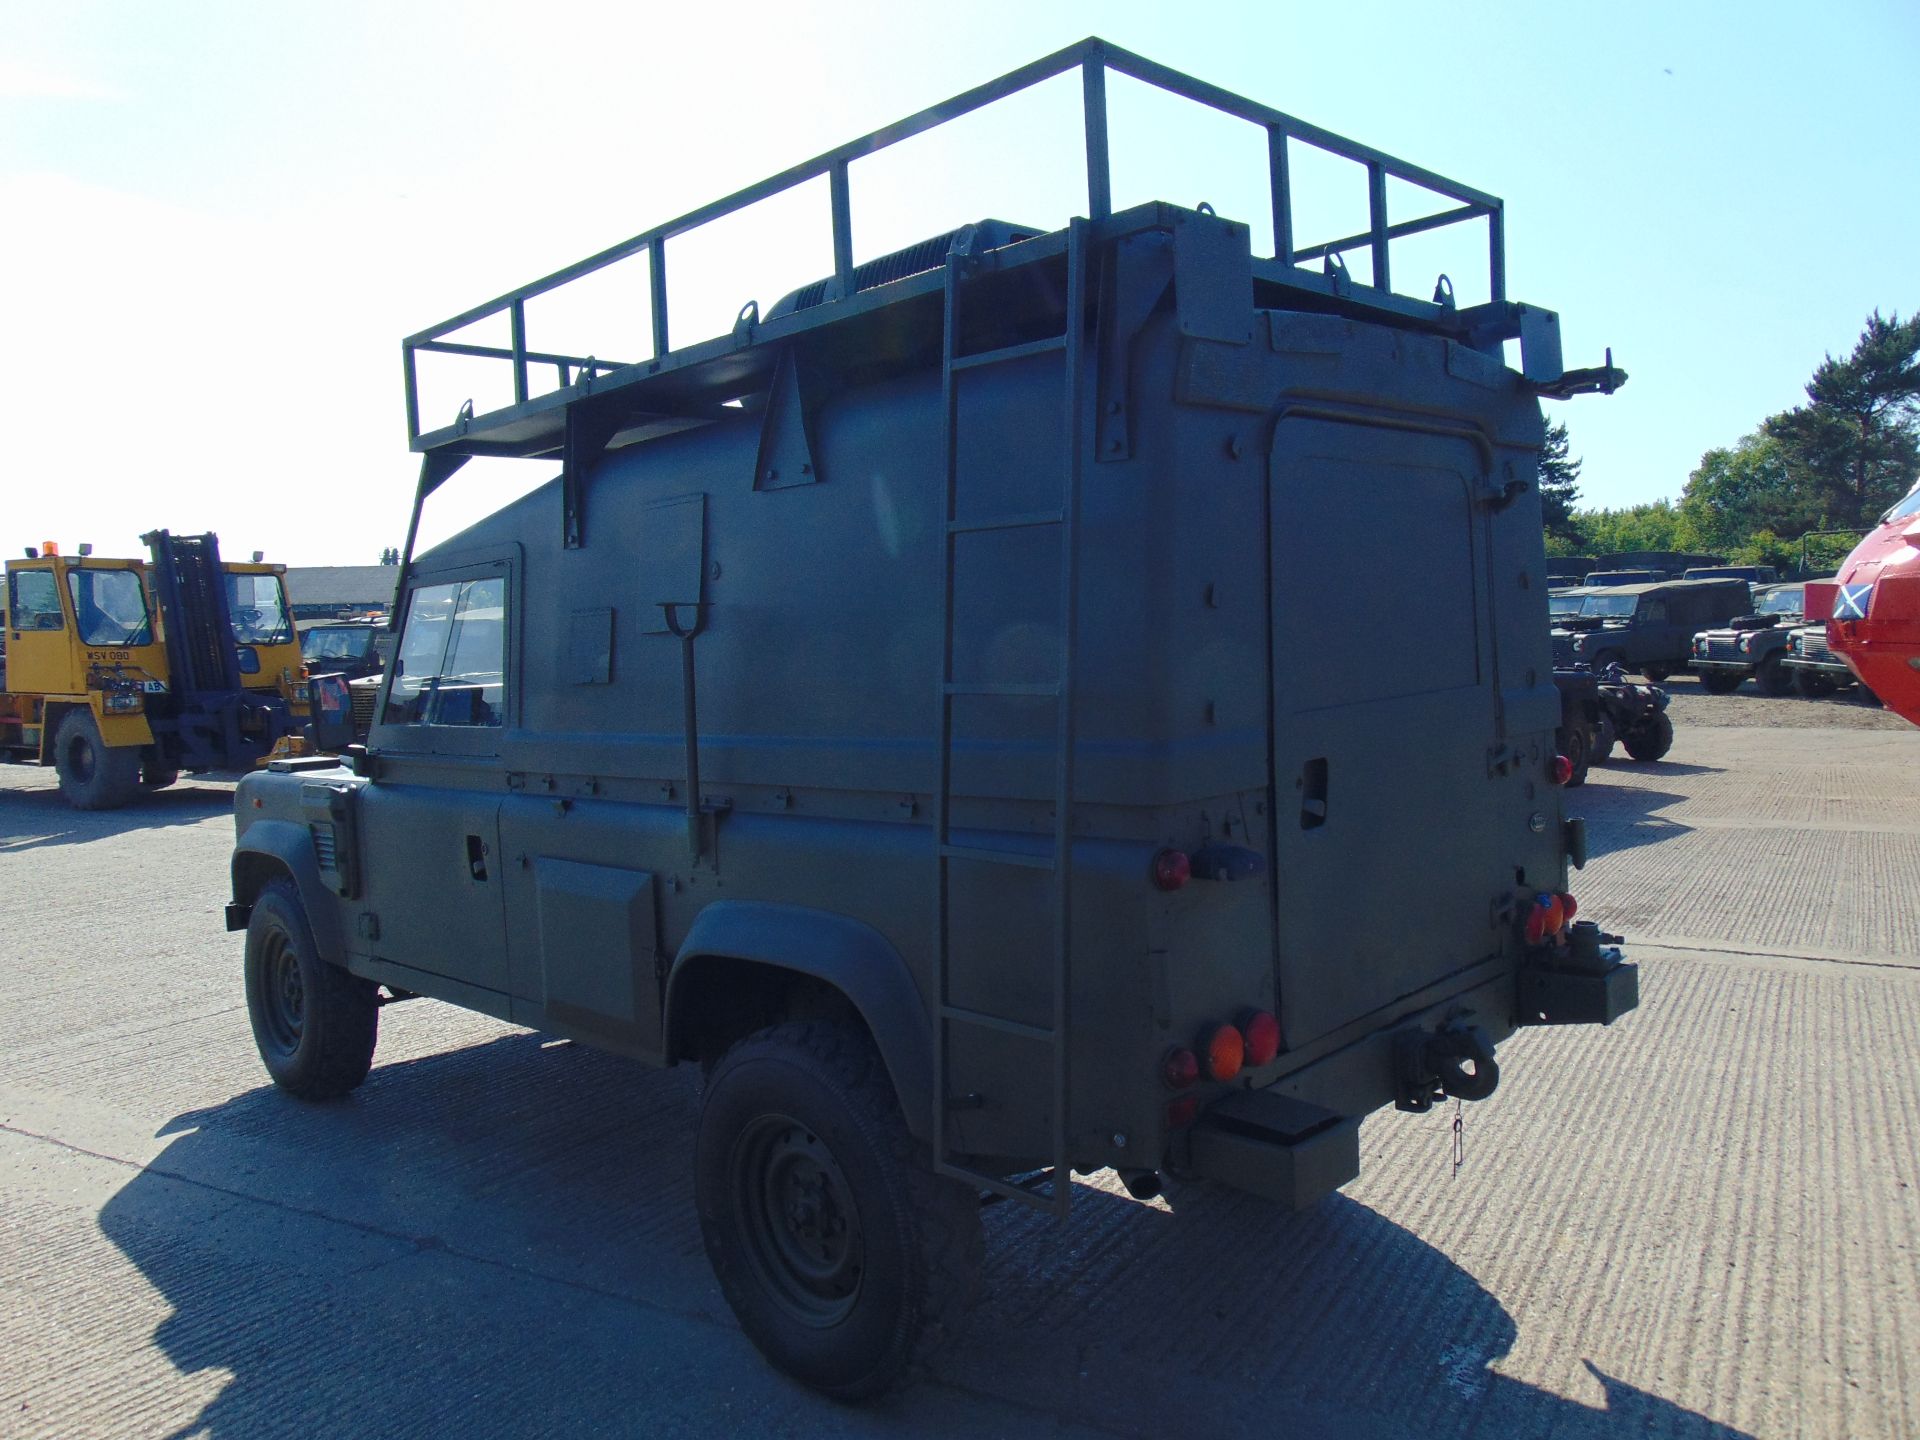 Land Rover Wolf 110 Hard Top Spice Comms vehicle - Image 6 of 25